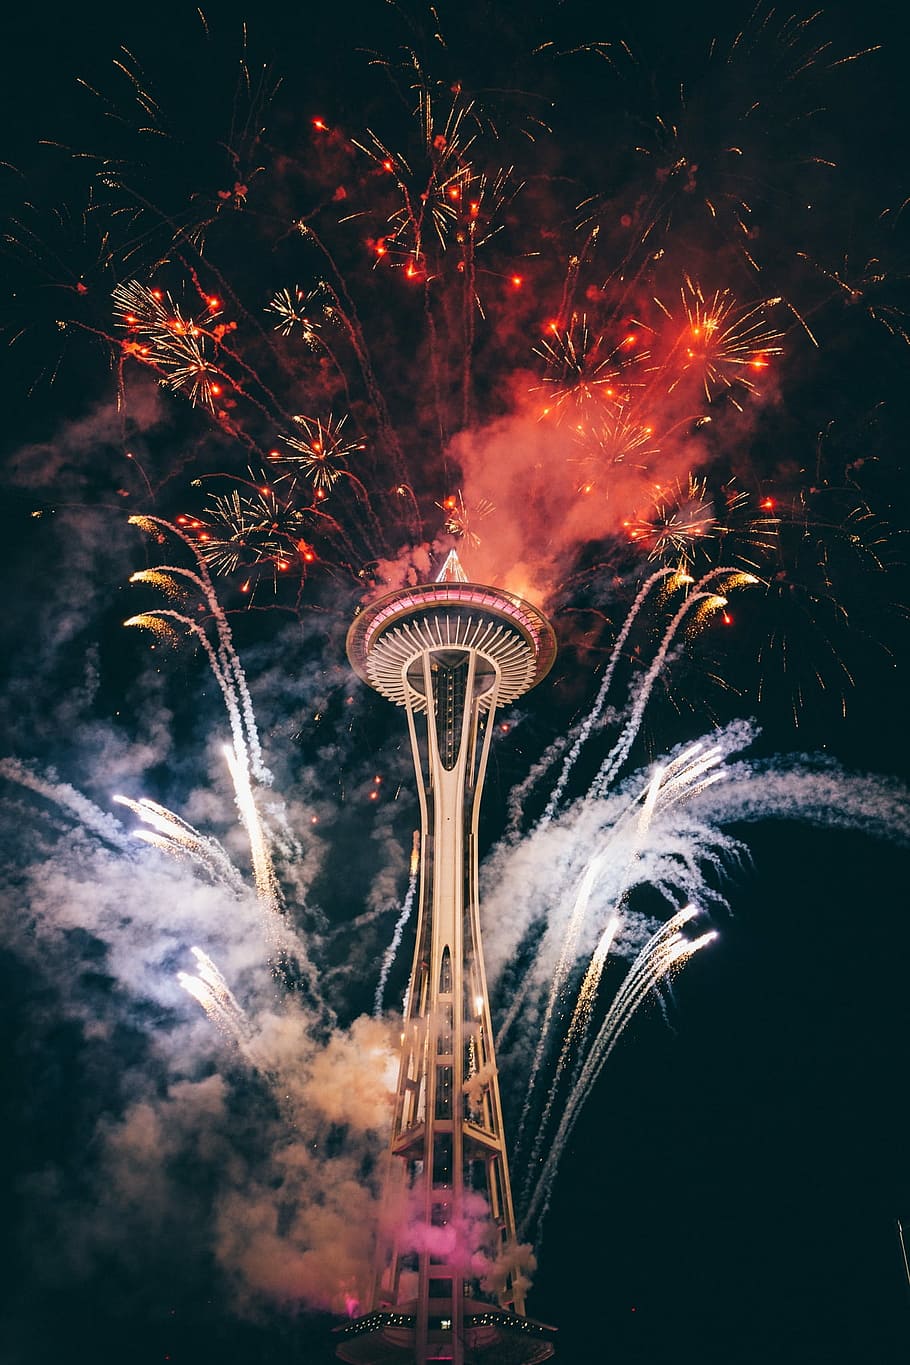 fireworks, night time, Space Needle, night, fire - Natural Phenomenon, celebration, firework Display, exploding, red, arts culture and entertainment